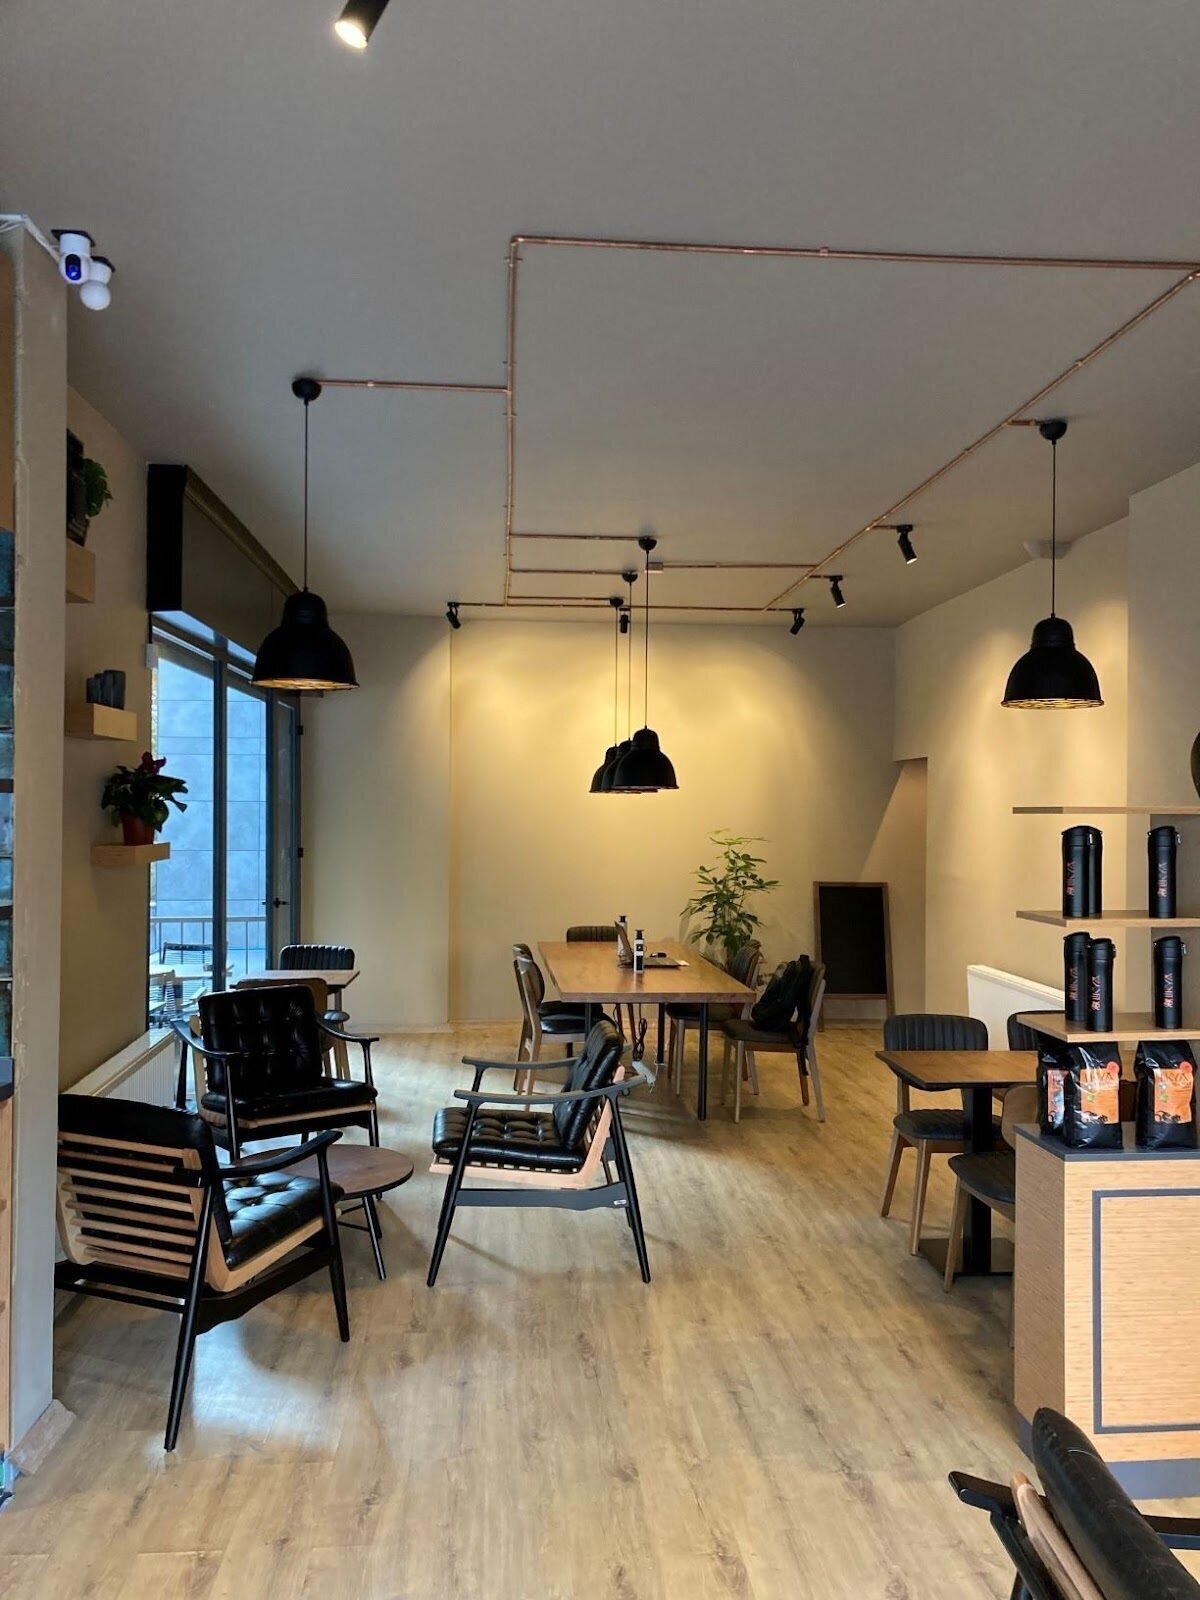 <span class="translation_missing" title="translation missing: en.meta.location_title, location_name: Likya Coffee, city: Istanbul">Location Title</span>